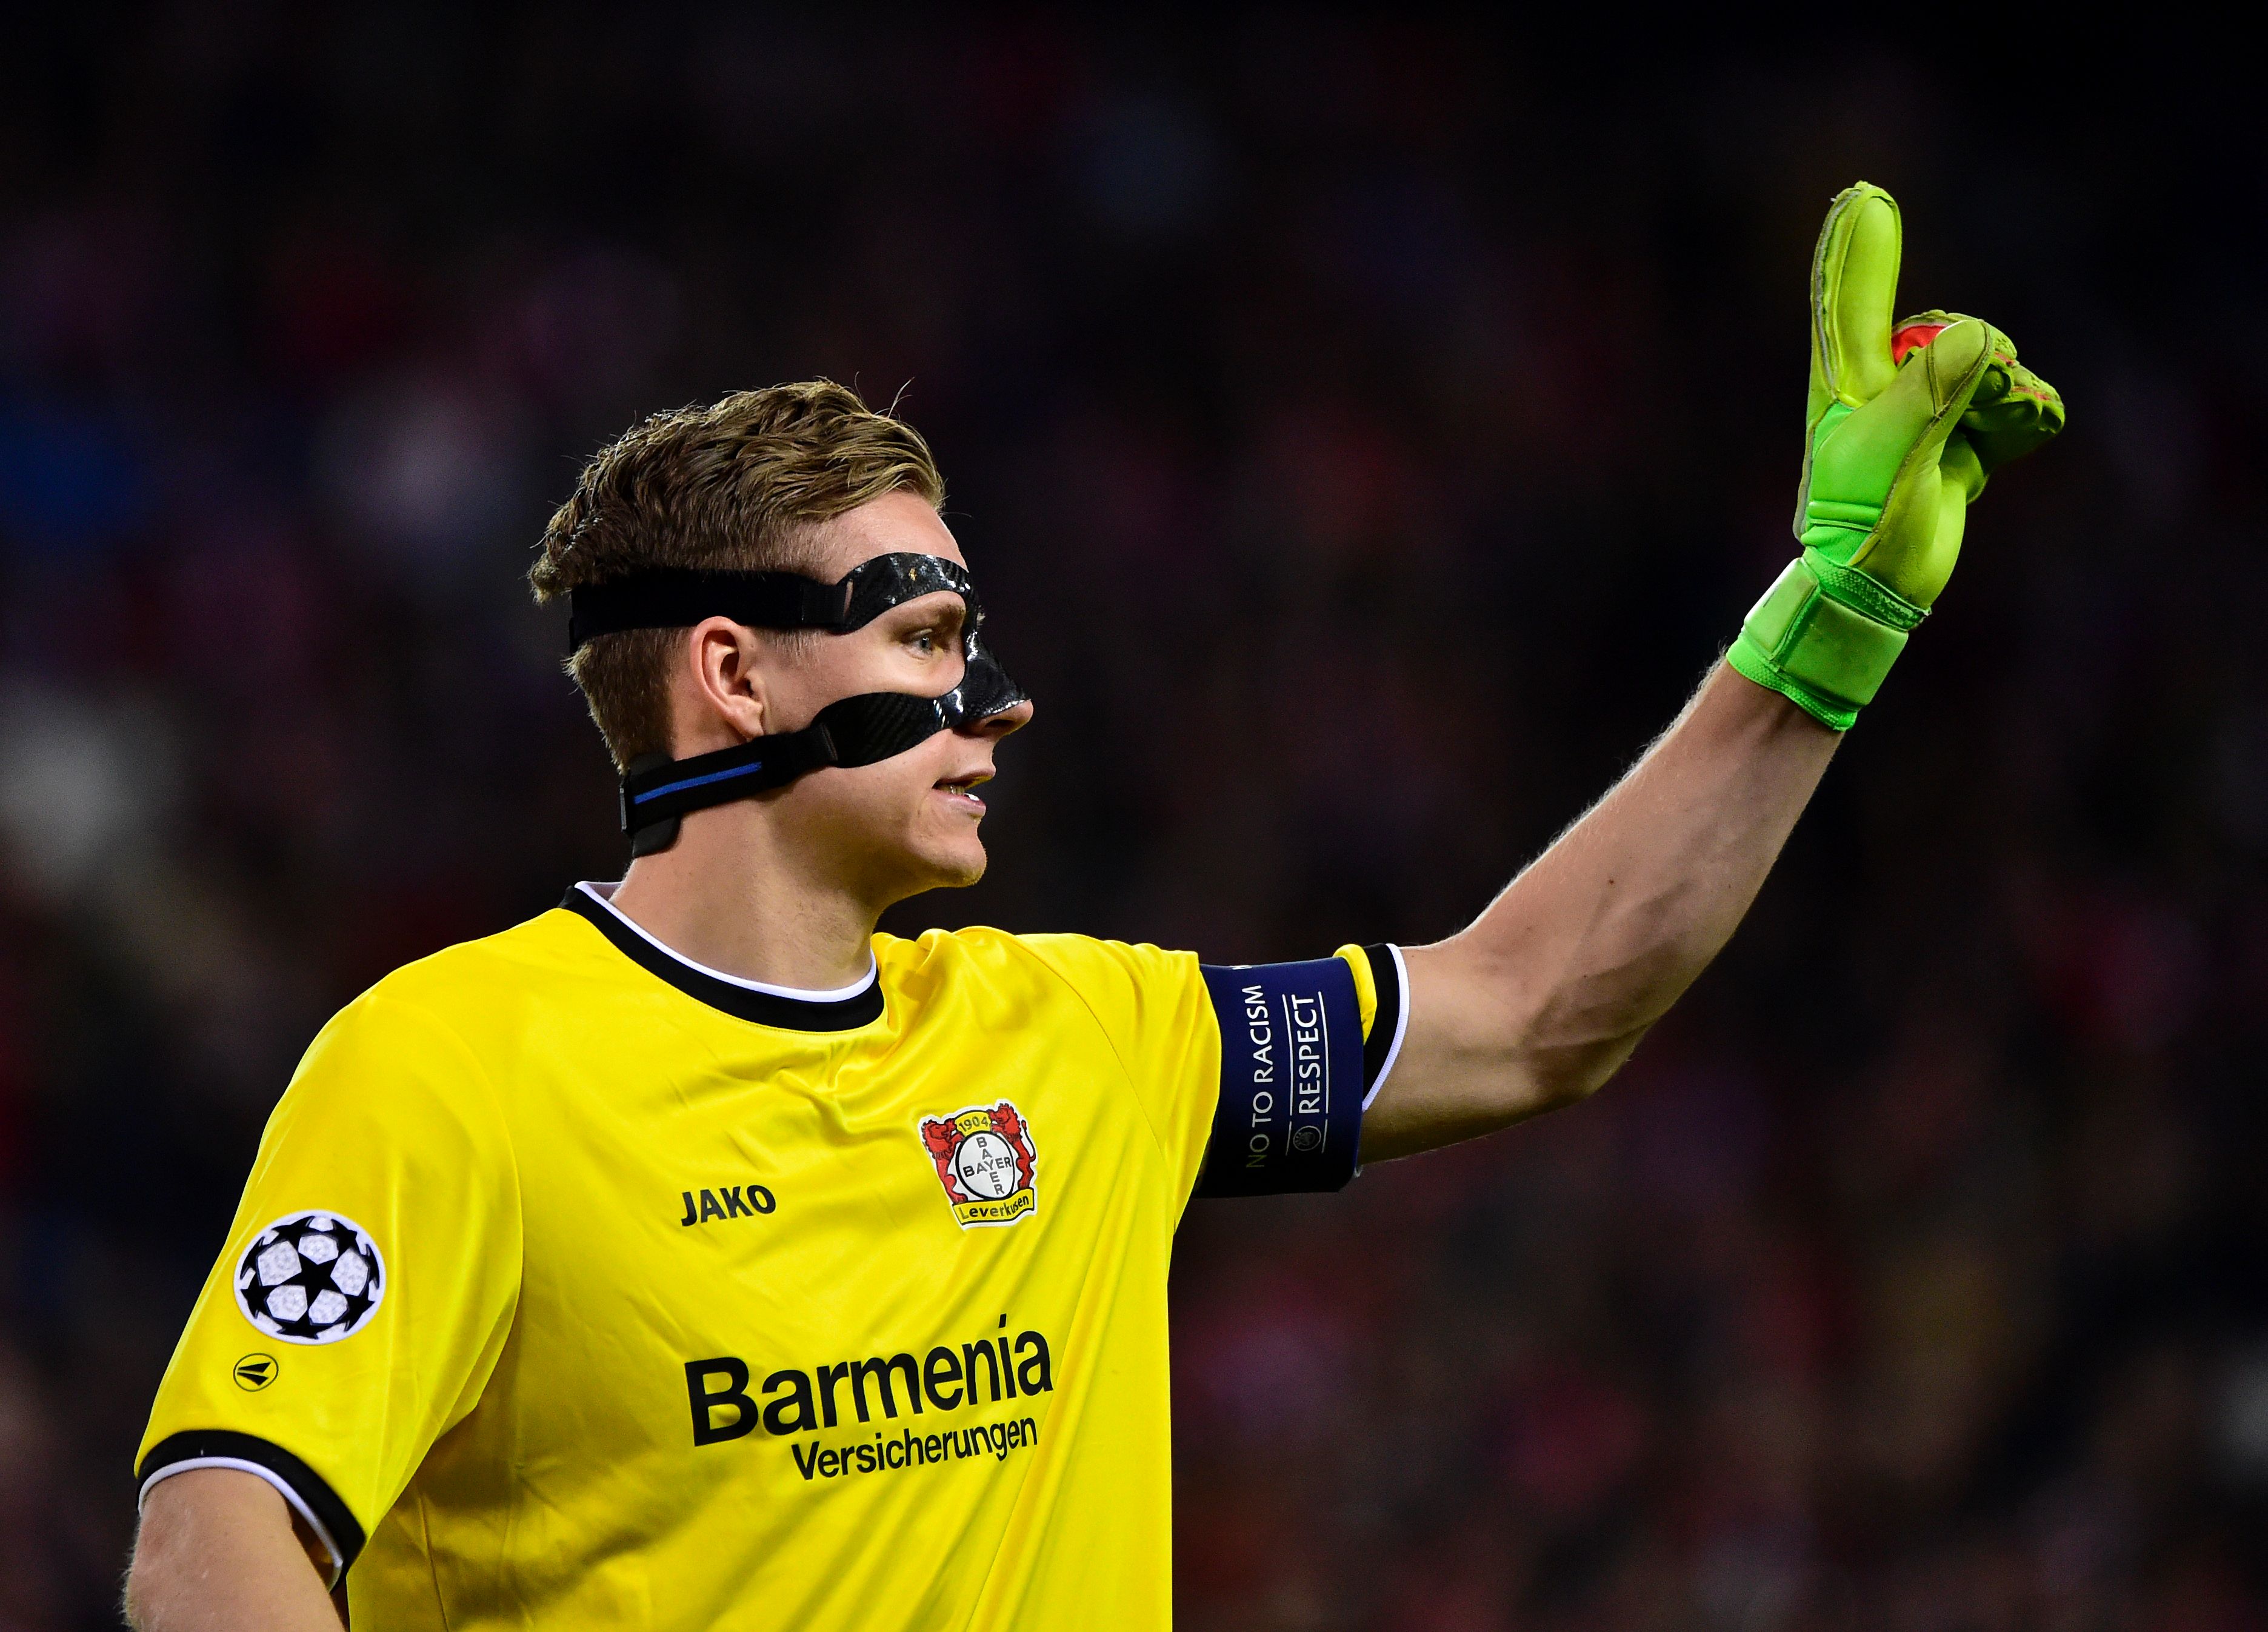 Leverkusen's goalkeeper Bernd Leno gestures during the UEFA Champions League round of 16 second leg football match Club Atletico de Madrid vs Bayer Leverkusen at the Vicente Calderon stadium in Madrid on March 15, 2017. / AFP PHOTO / GERARD JULIEN        (Photo credit should read GERARD JULIEN/AFP/Getty Images)